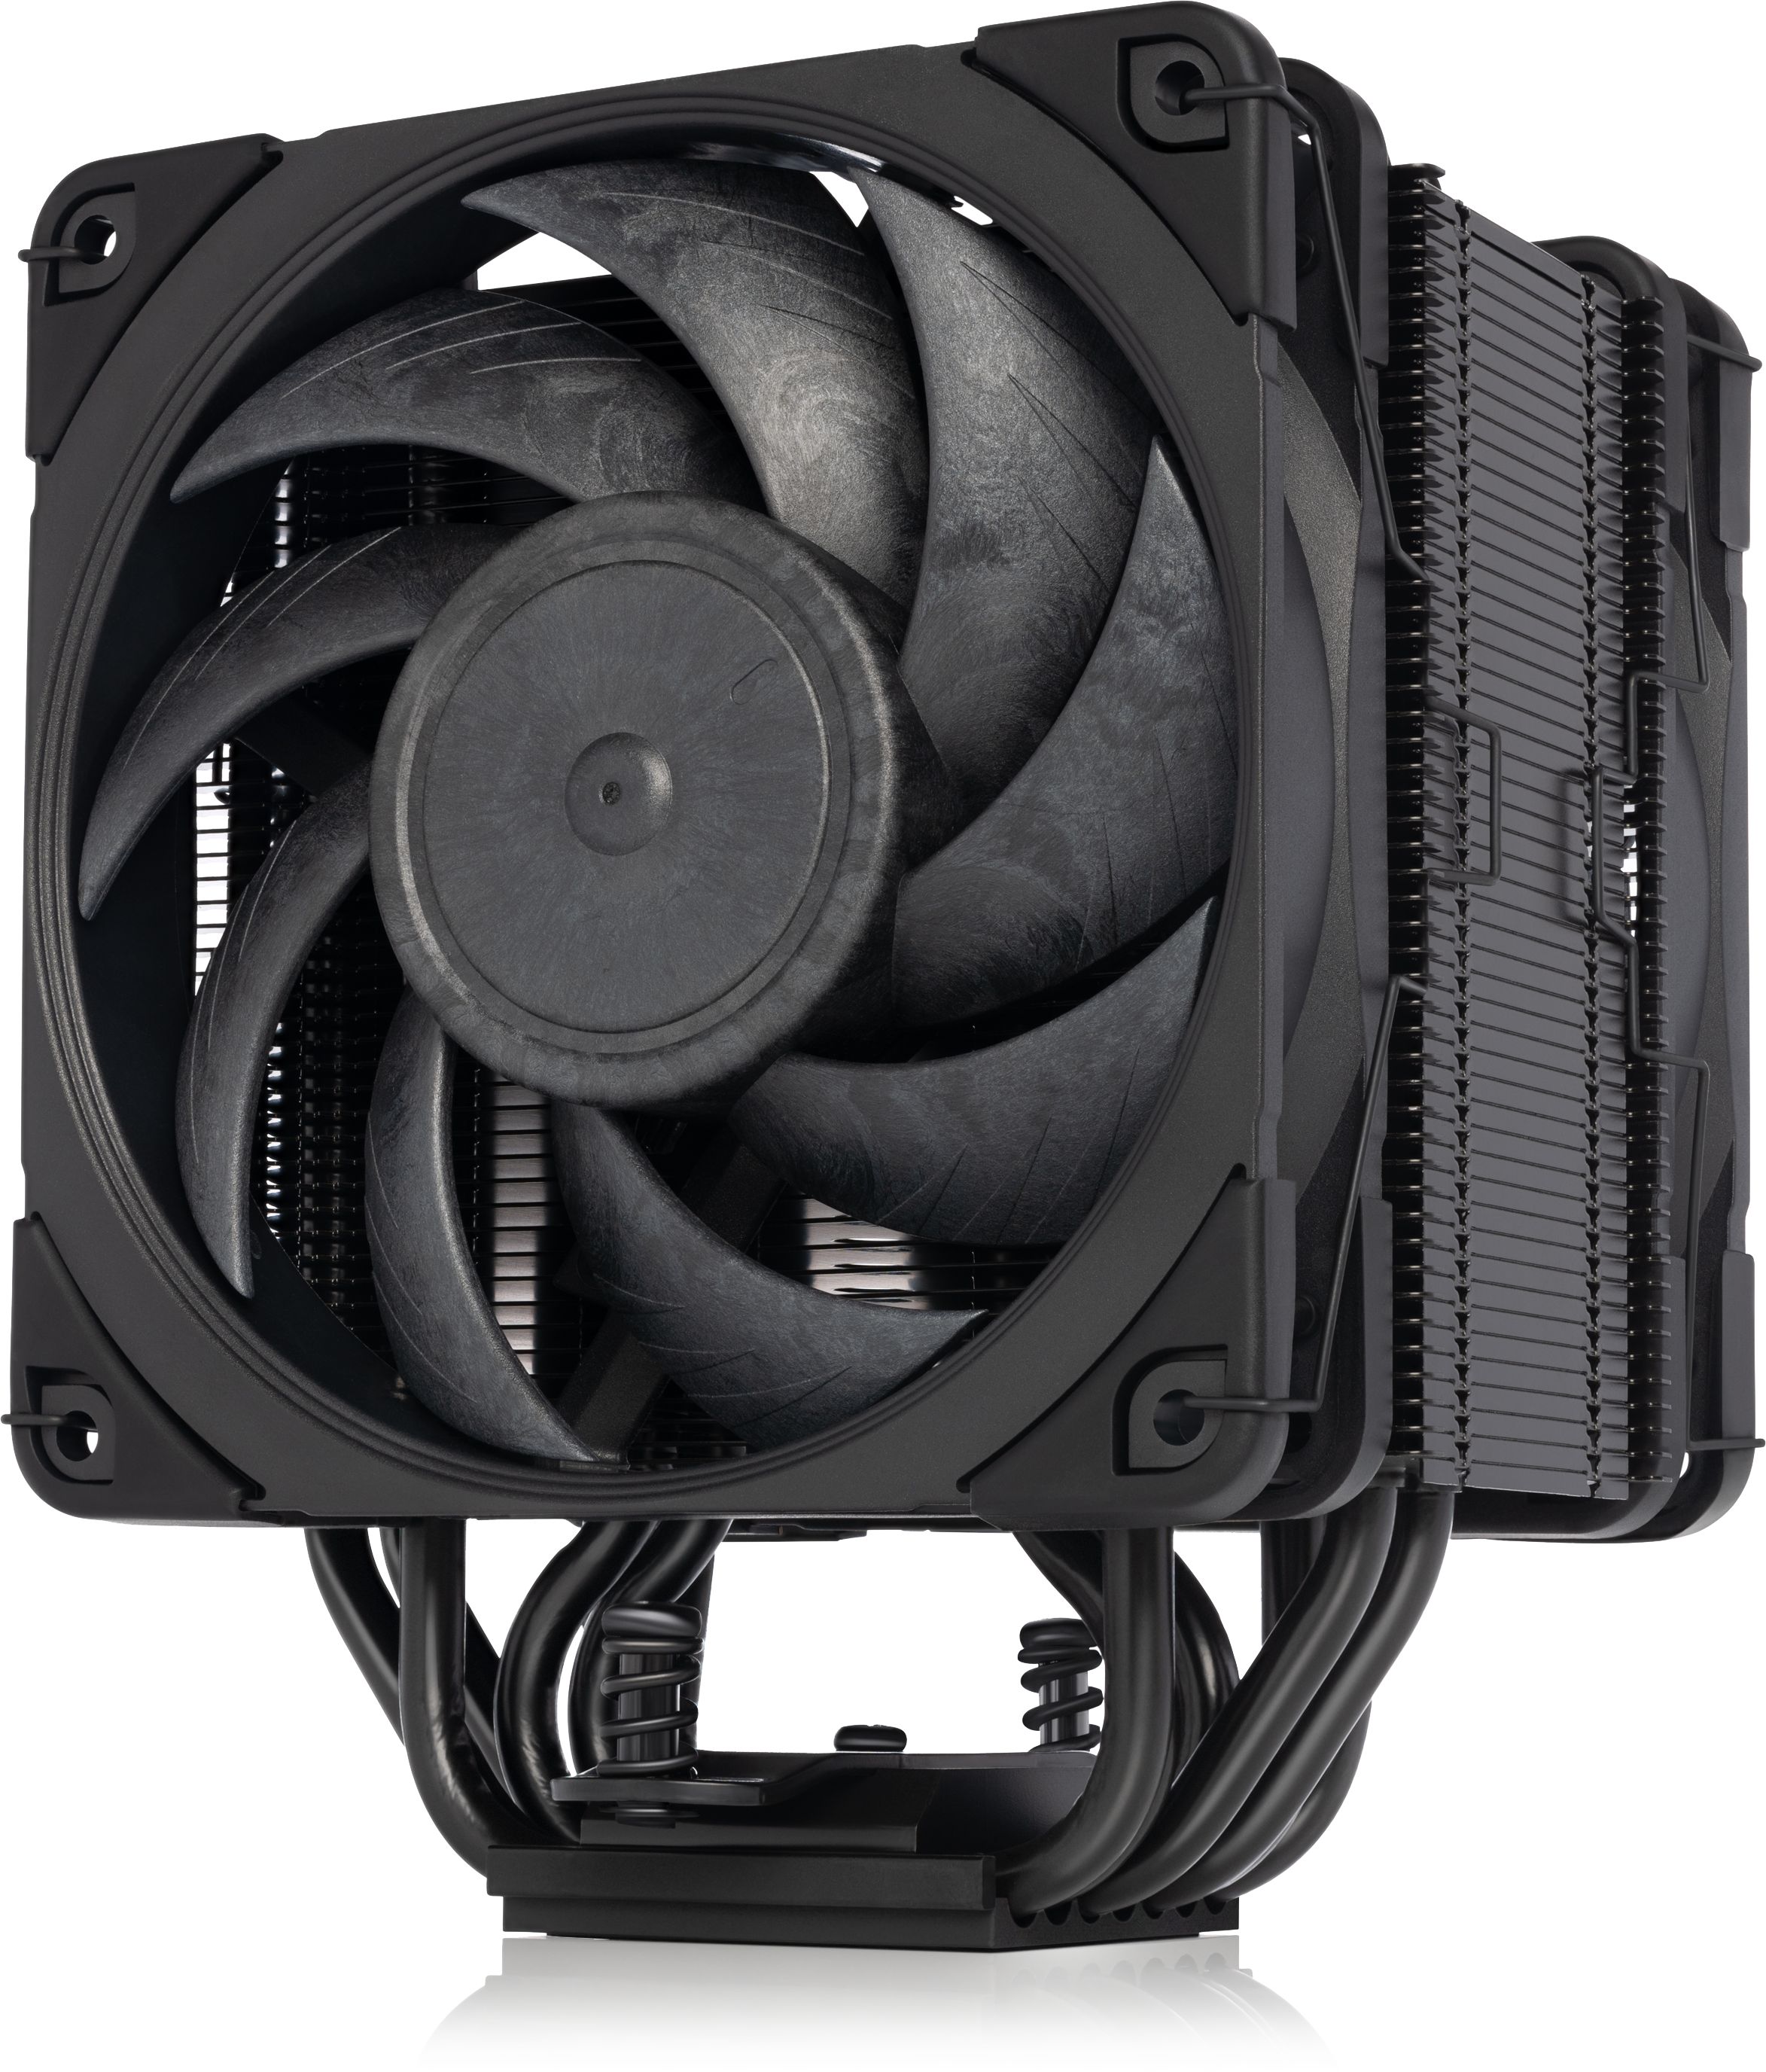 NH-U12A chromax.black 120mm CPU Cooler with two quiet NF